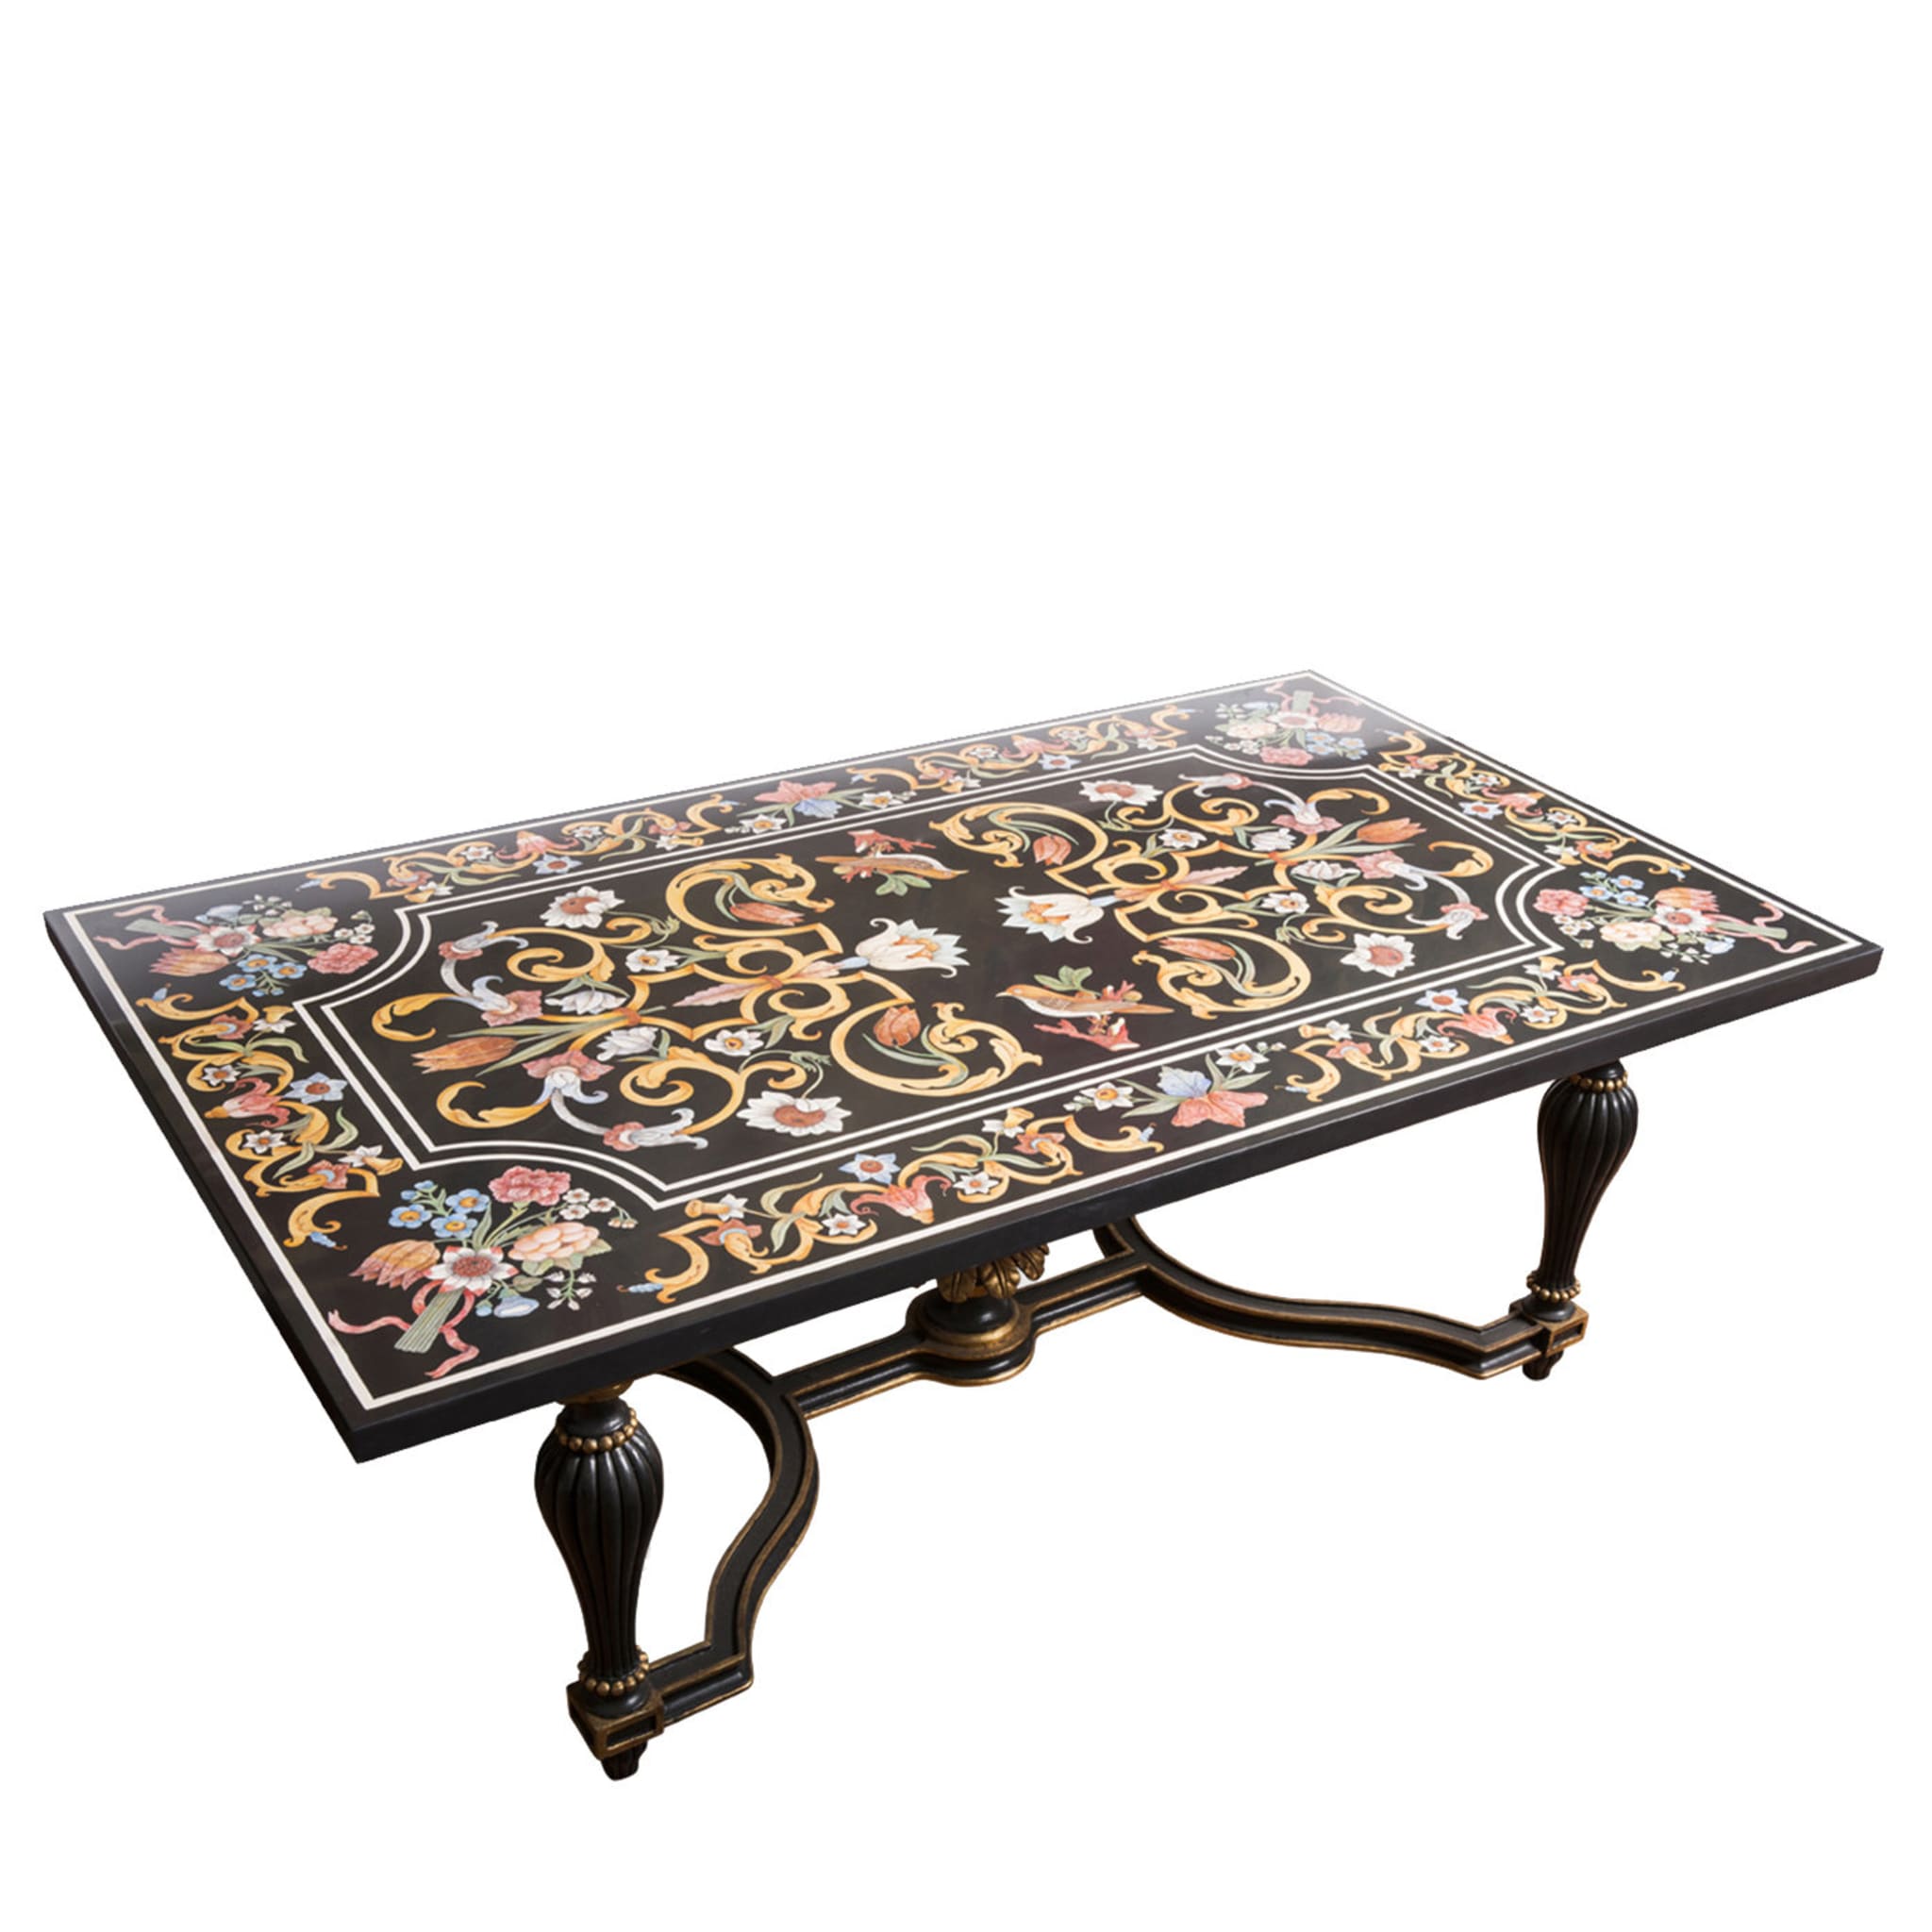 Settecento Marble Inlay Table - Main view